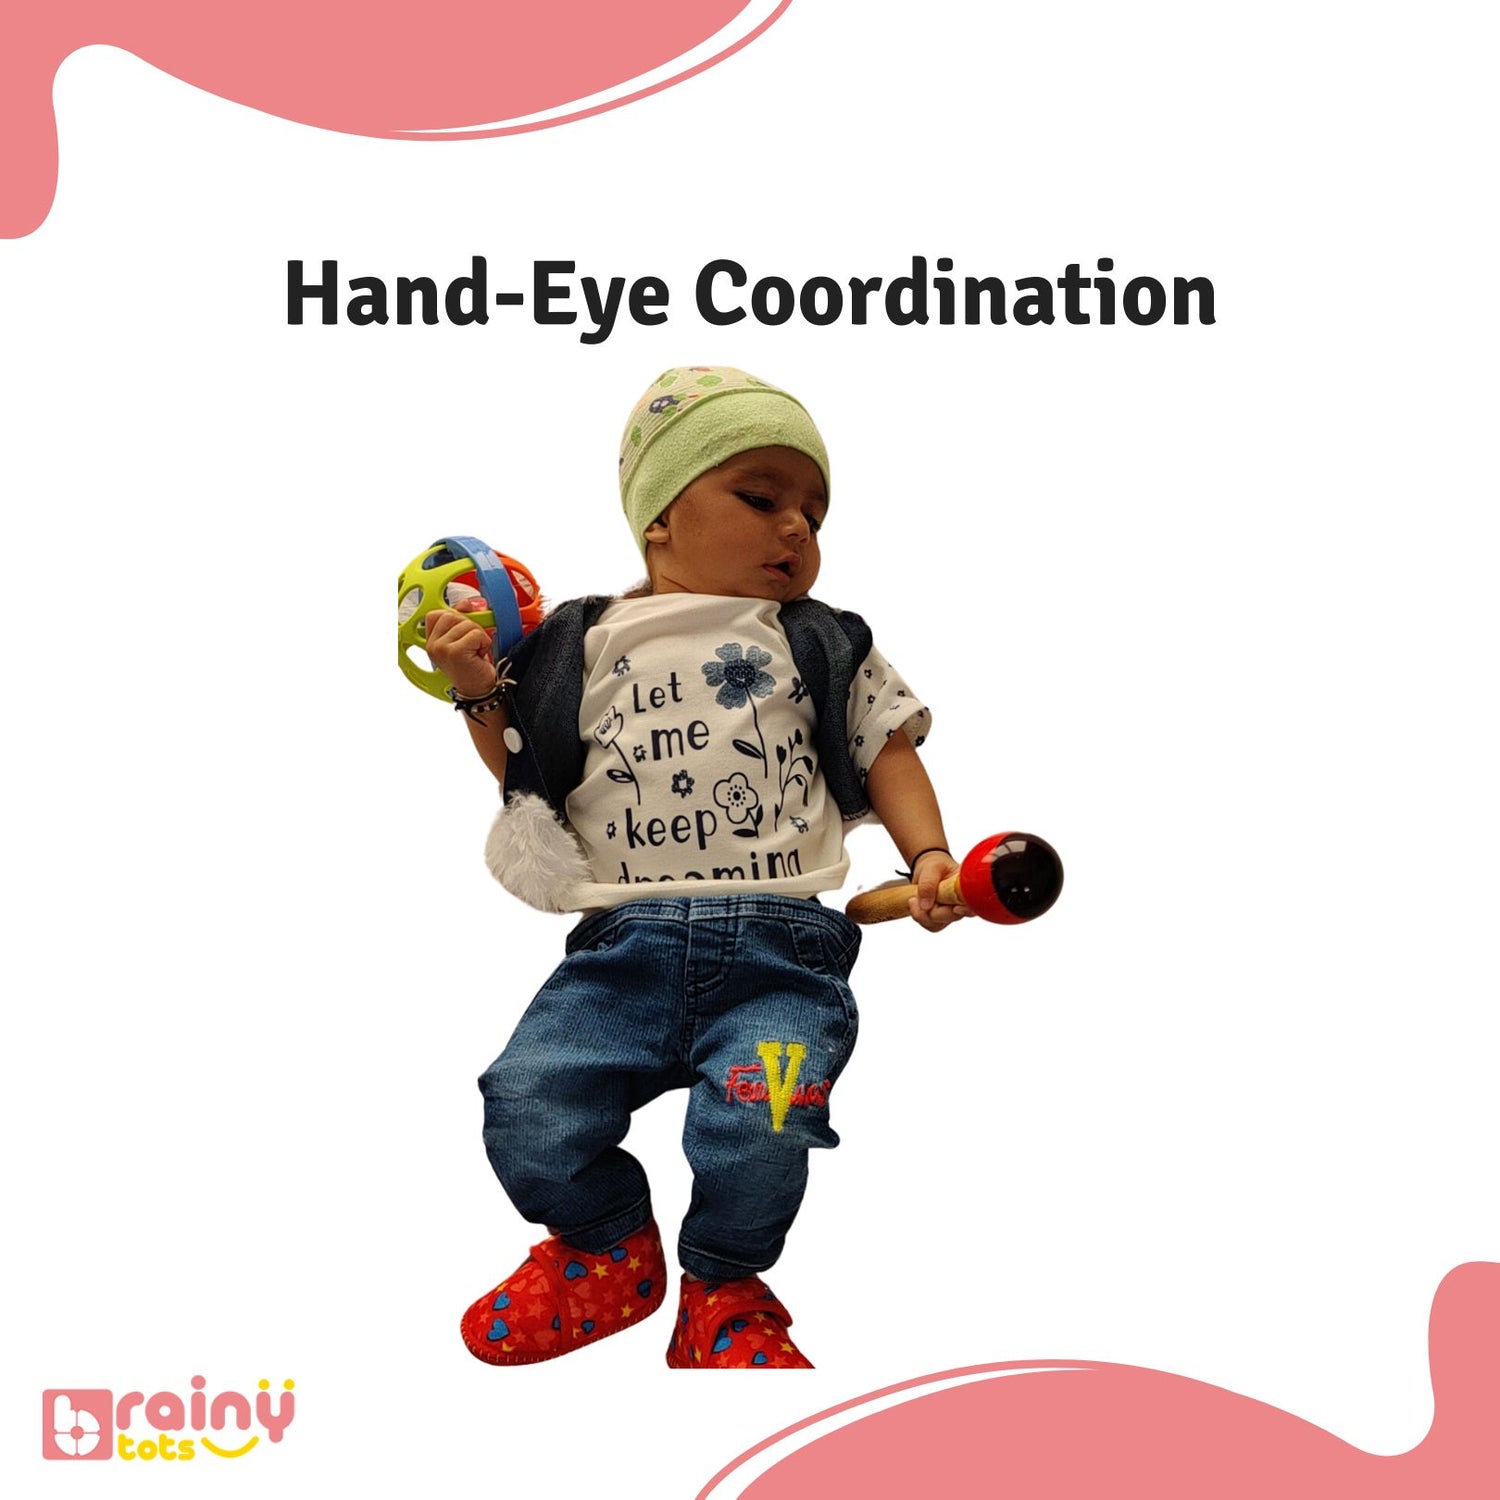 Improve hand-eye coordination with our Wooden Egg Shakers Pairs. Explore our website to find out how these rhythmic instruments engage both senses, fostering a deeper connection between movement and visual perception, perfect for enhancing motor skills in learners of all ages.